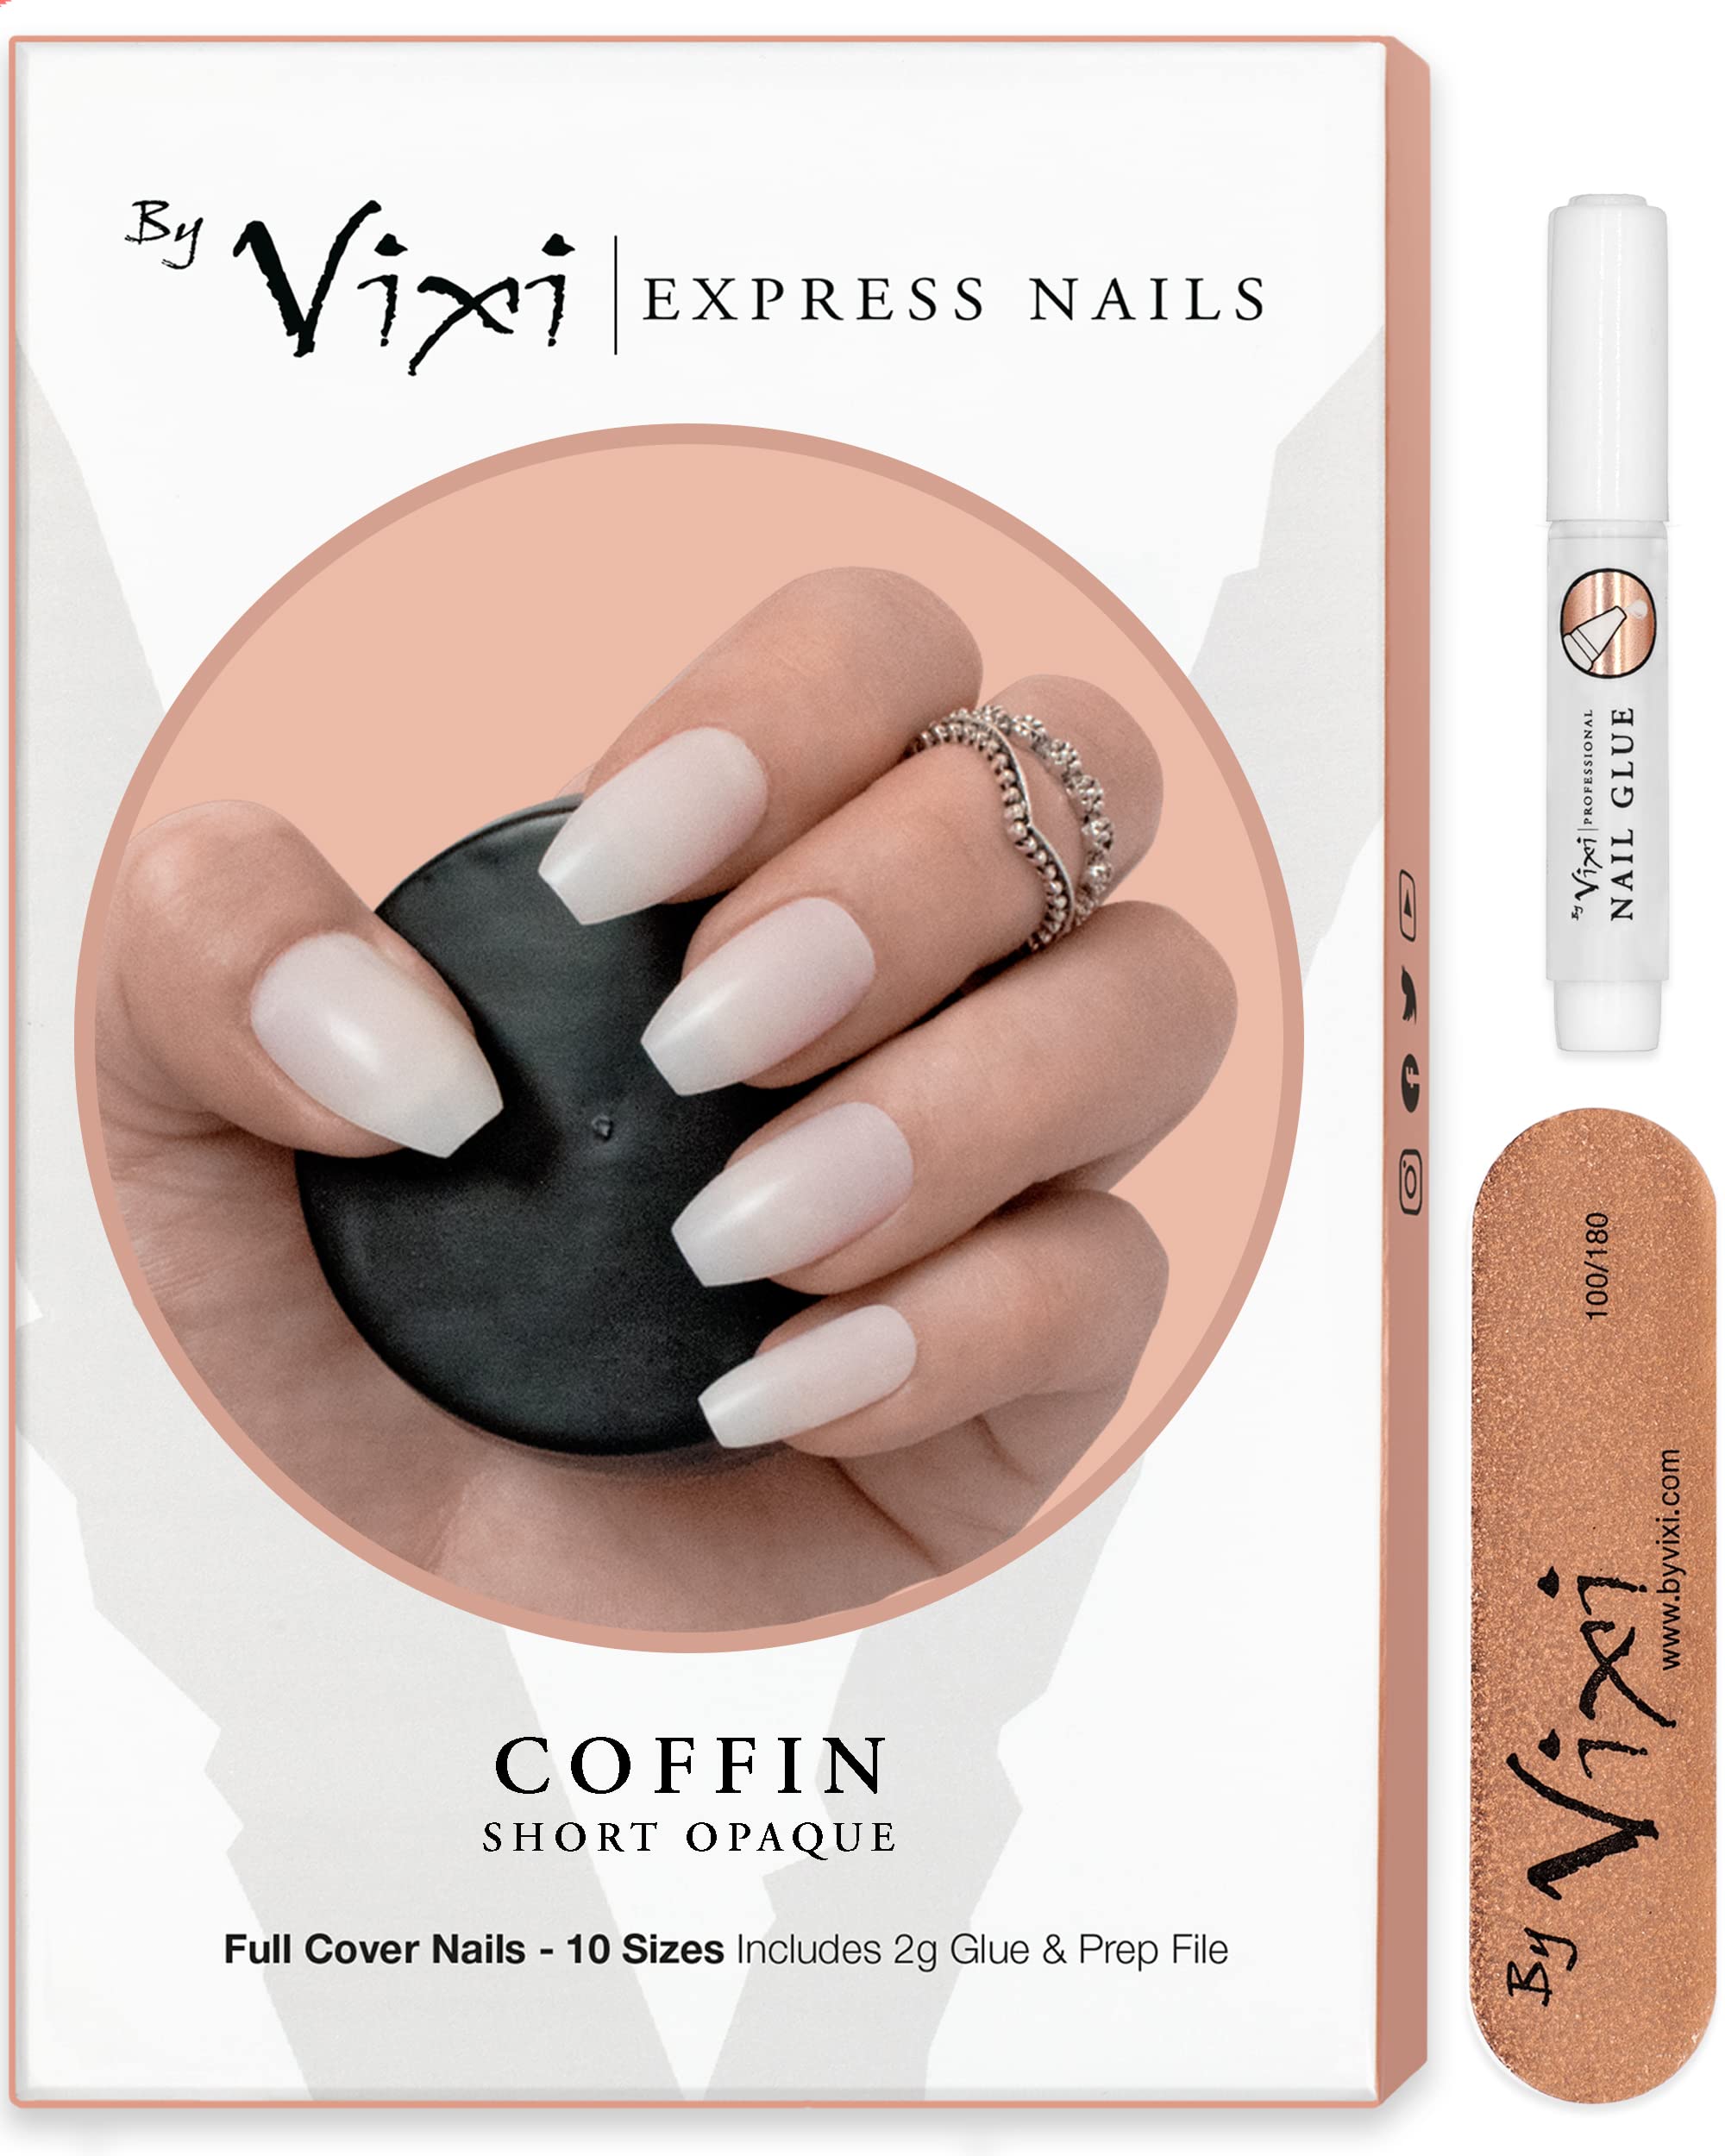 500-pieces SHORT COFFIN/BALLERINA NAIL SET with FREE GLUE & PREP FILE, 10 Sizes – Opaque Express Full Cover False Fingernail Extensions for Salon Professionals & Home Use - By Vixi